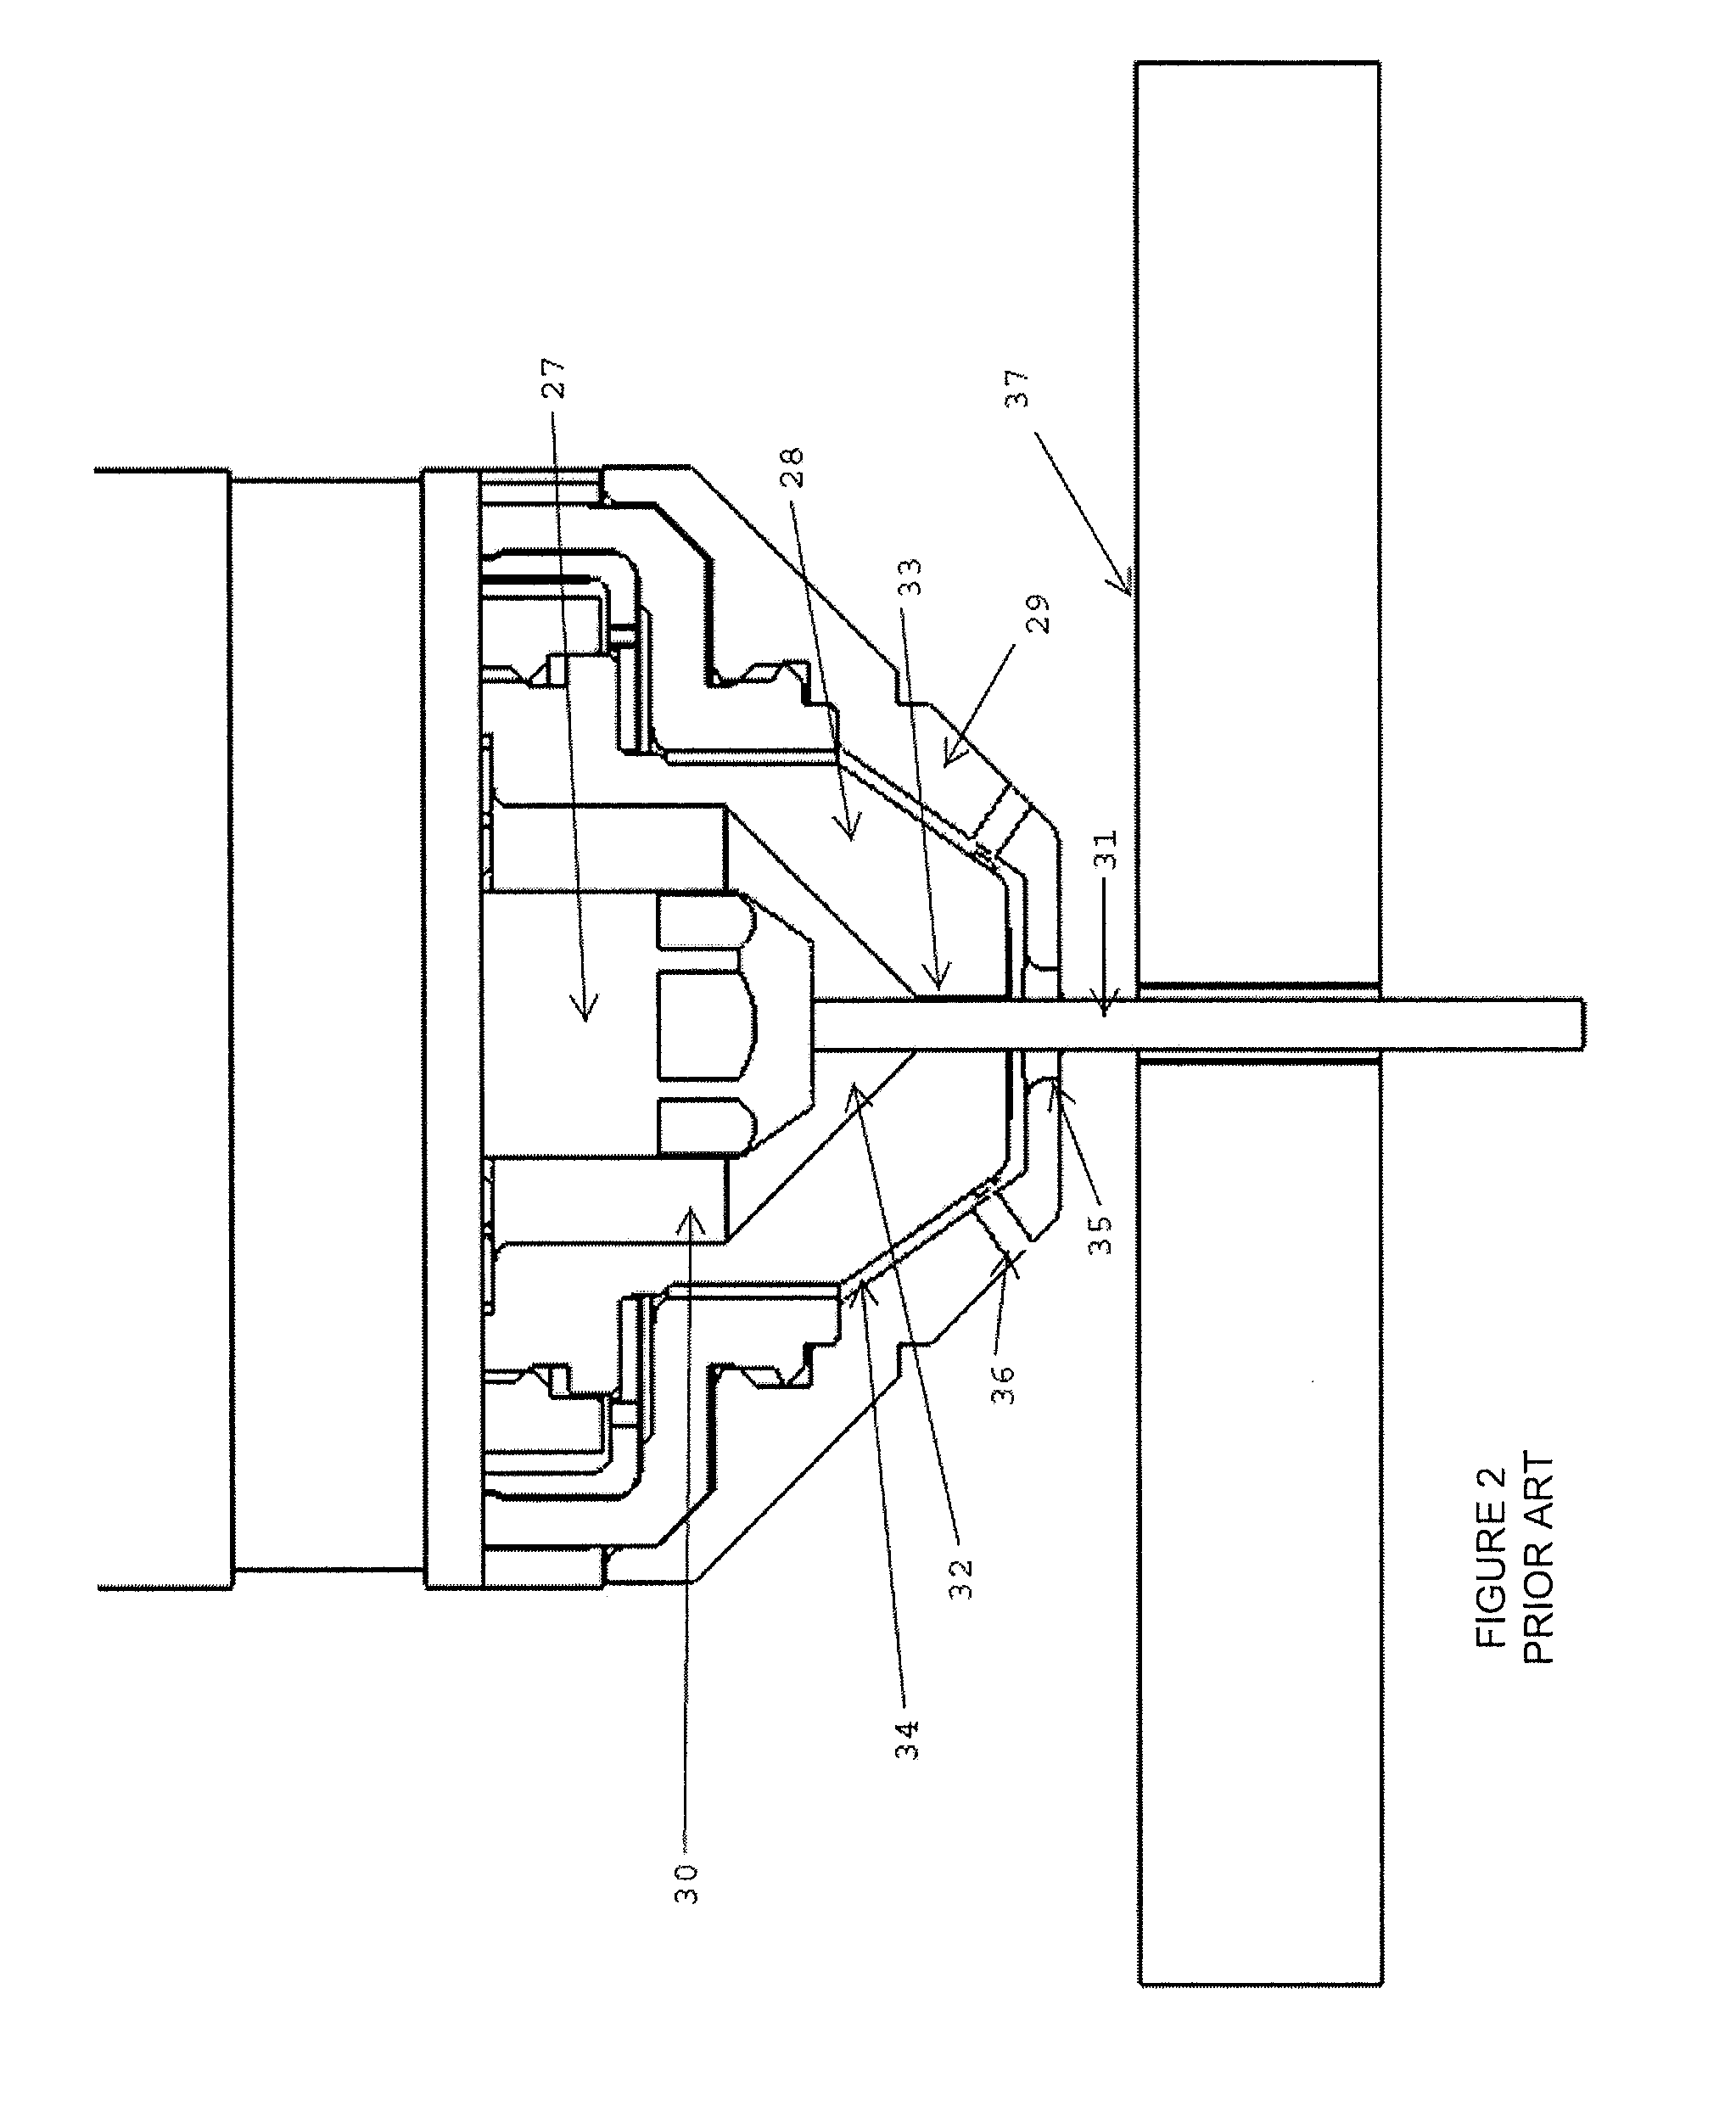 Method And Apparatus For Cutting High Quality Internal Features And Contours